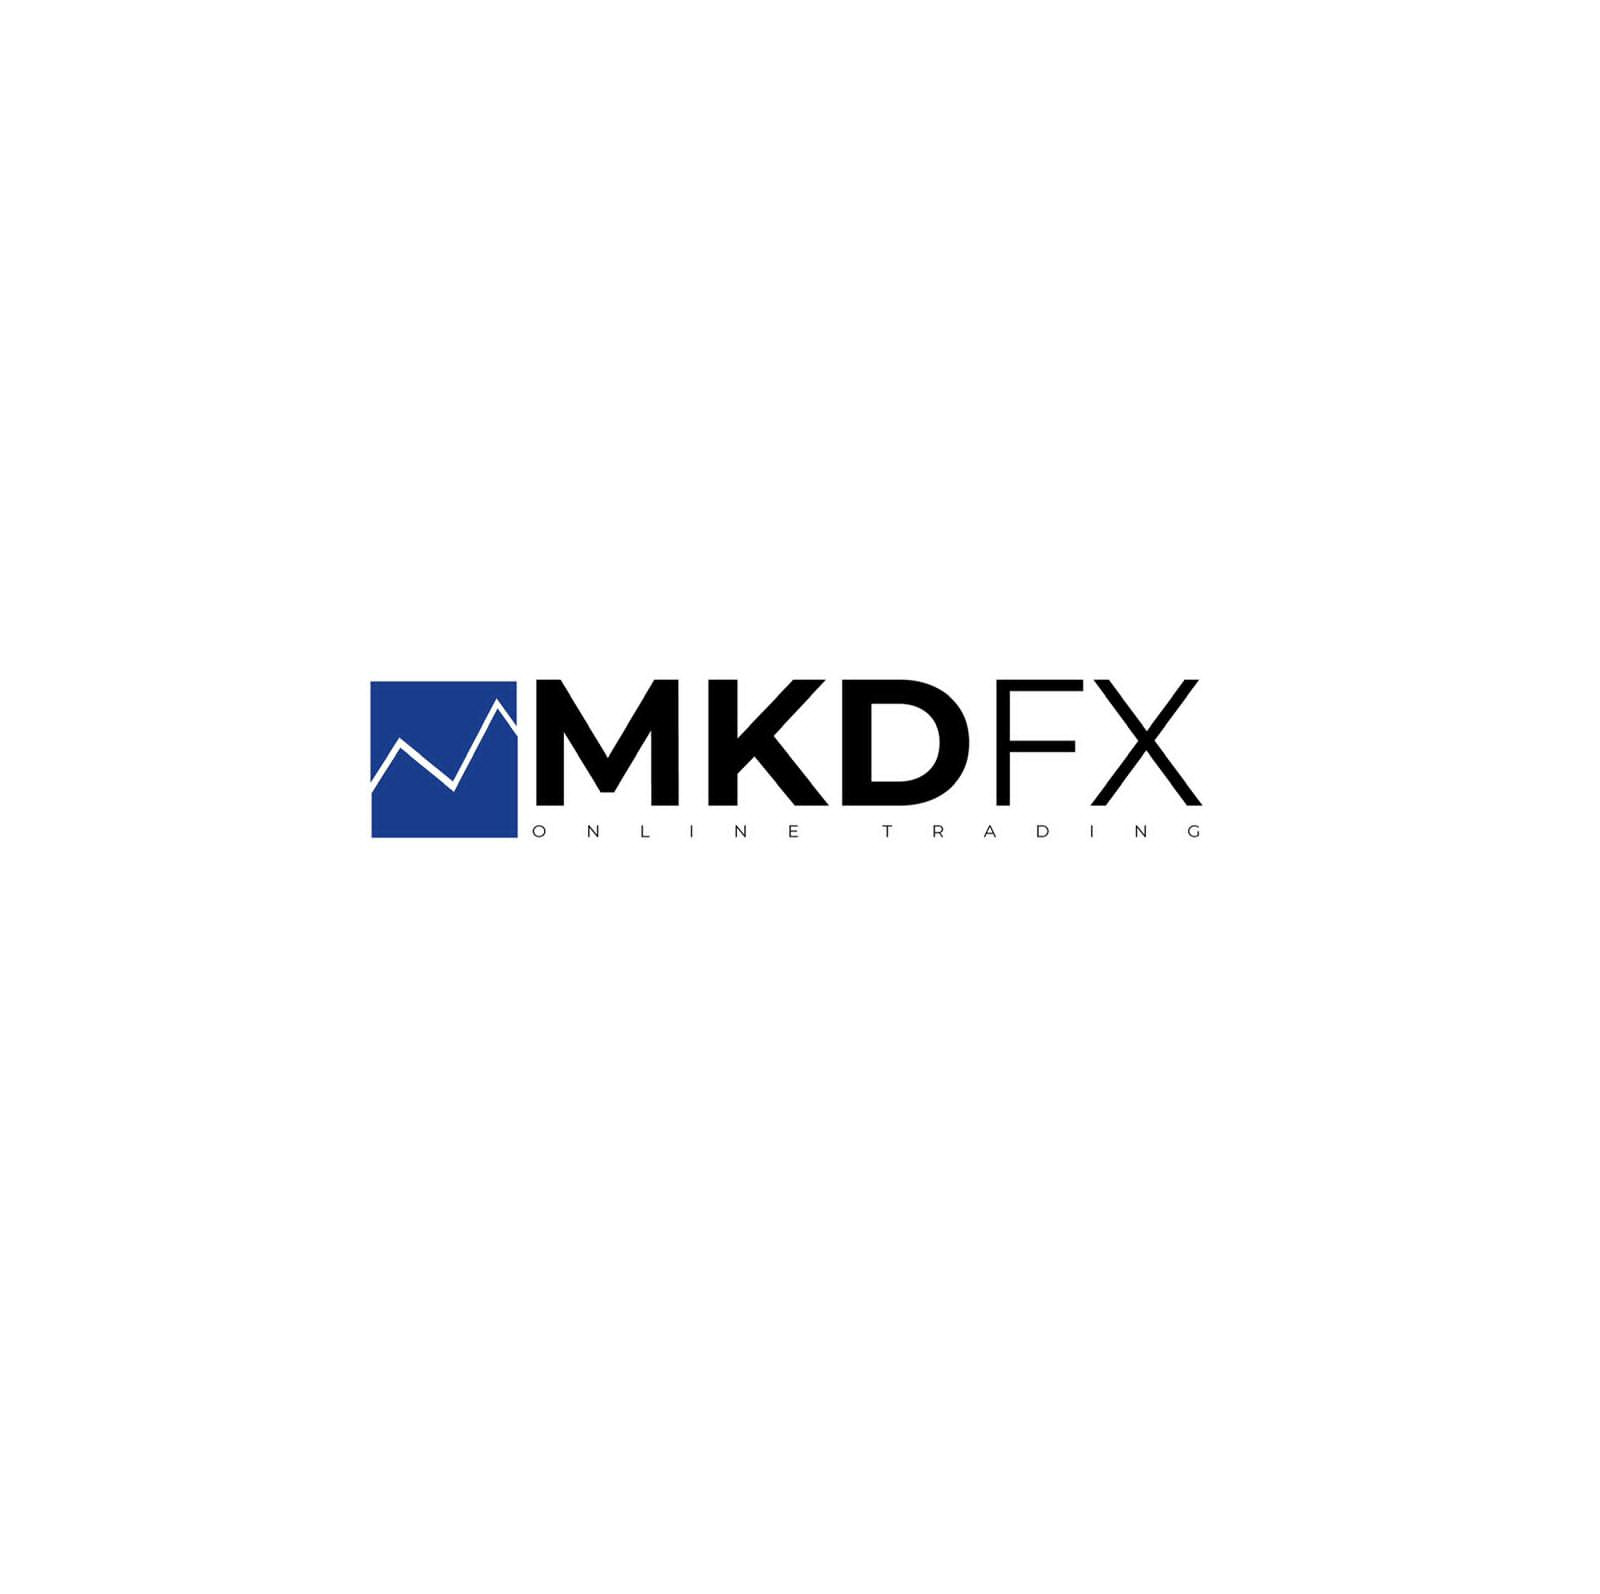 How MKDFX Is Helping Ordinary People Prosper through Online Trading